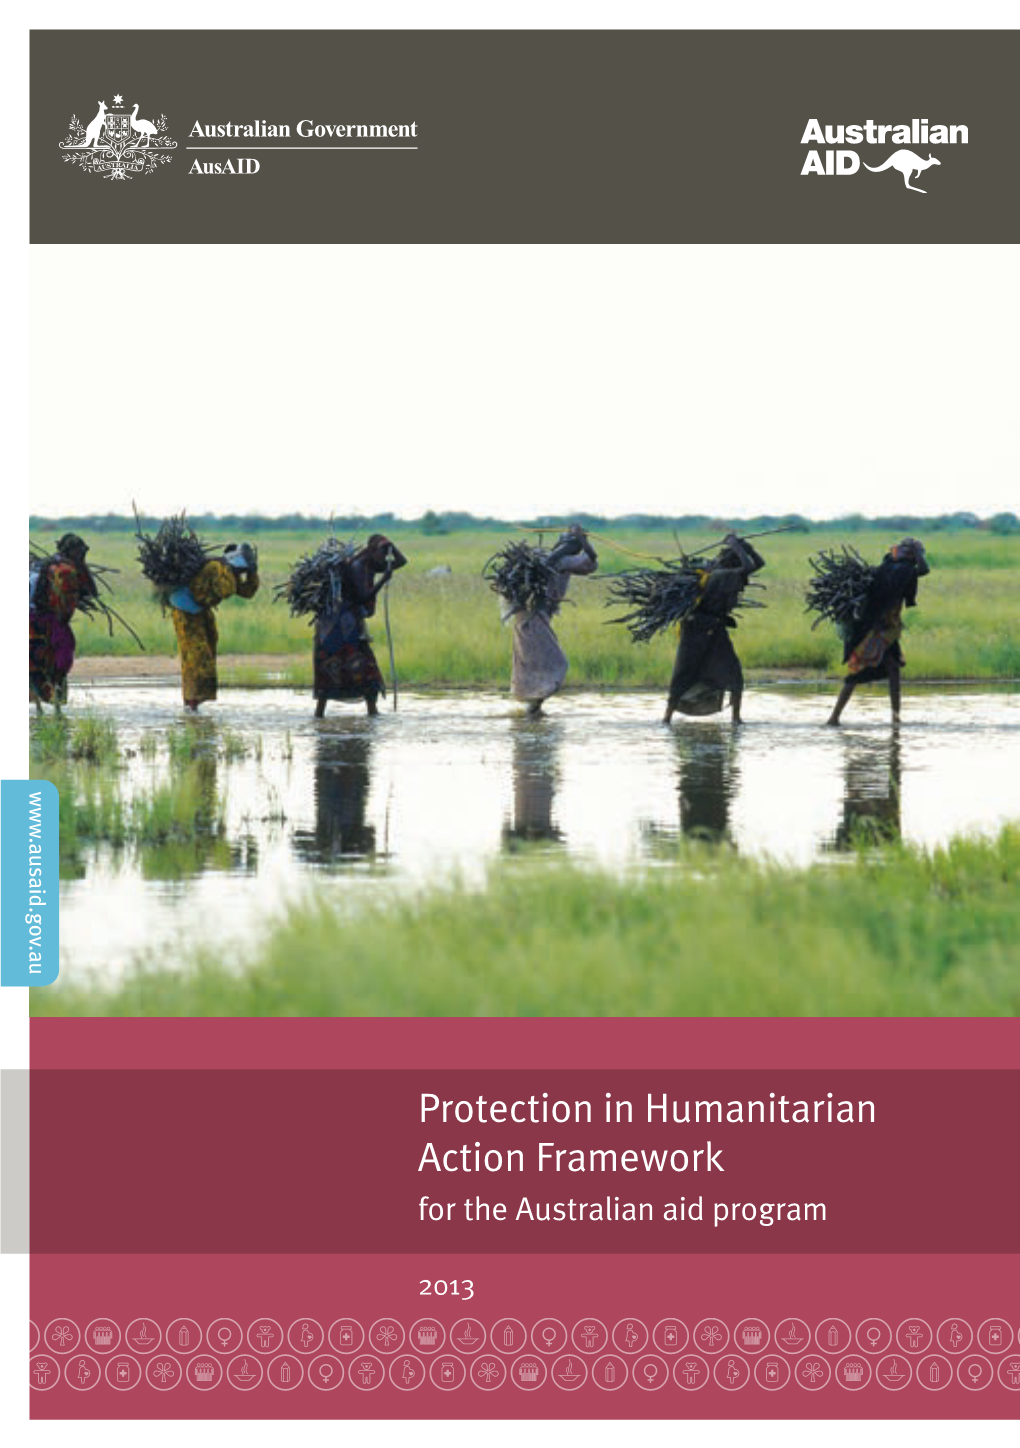 Protection in Humanitarian Action Framework for the Australian Aid Program